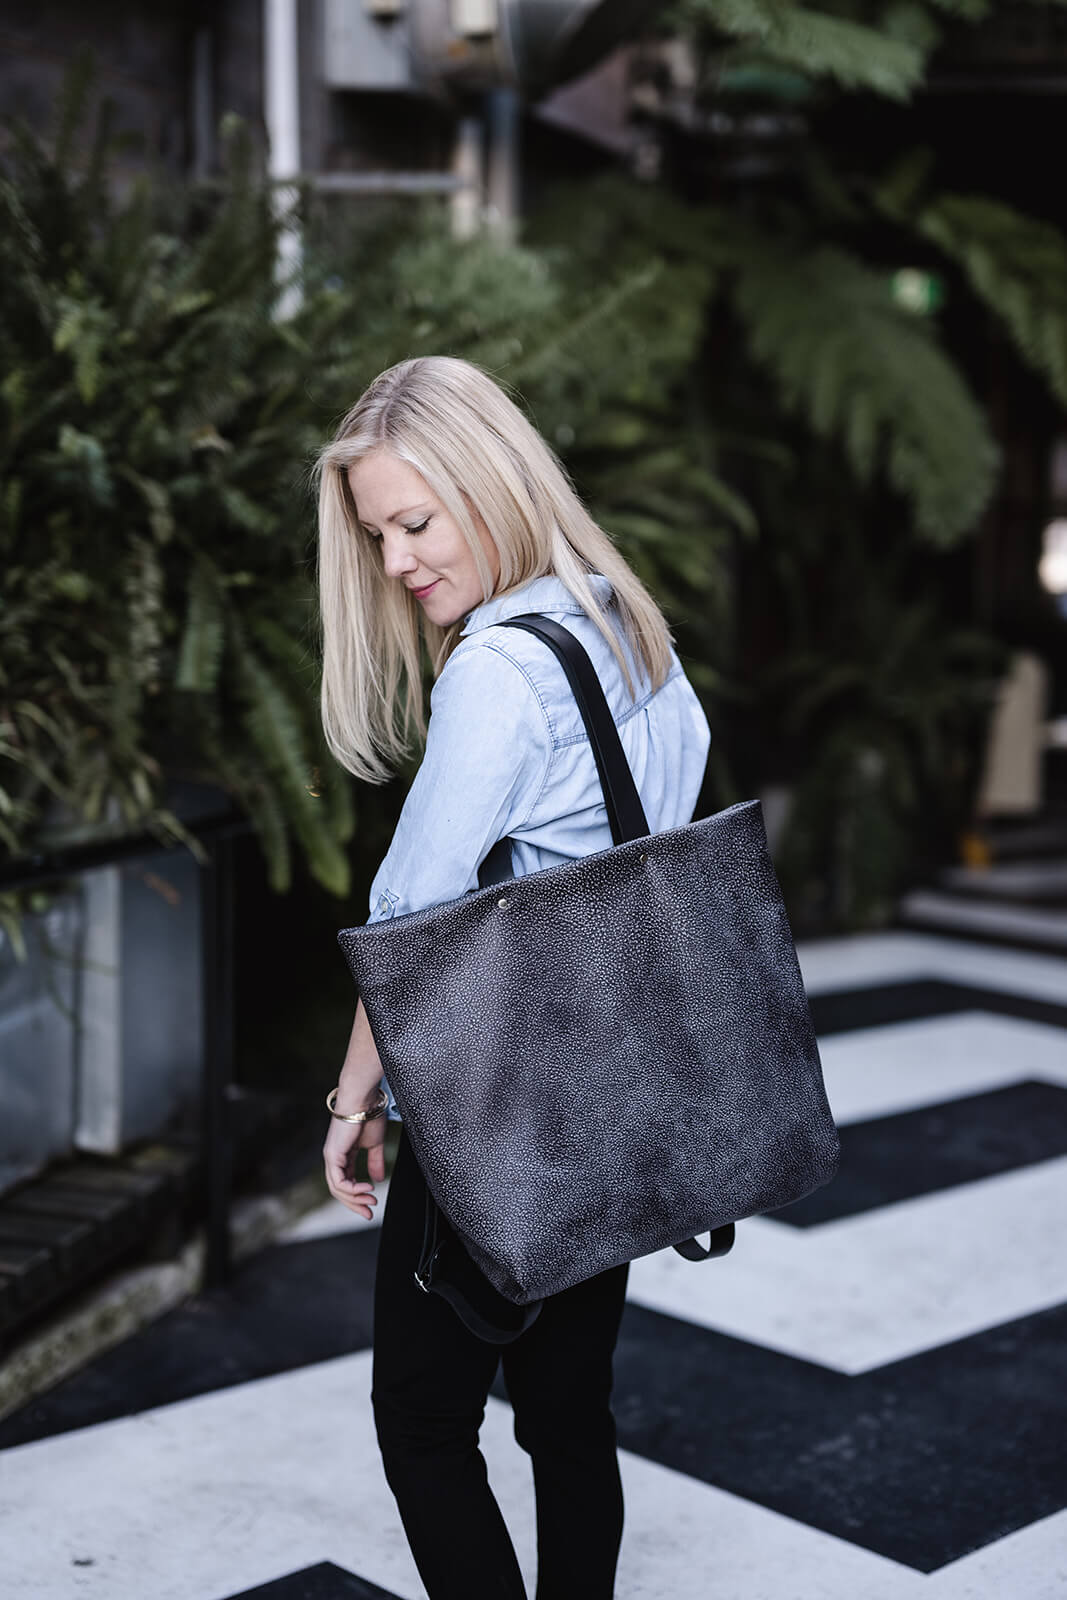 Woman with long blonde hair wearing a light denim shirt and black jeans, and looking down at her grey tote with black straps. She is standing on black and white zigzag floor in front of greenery